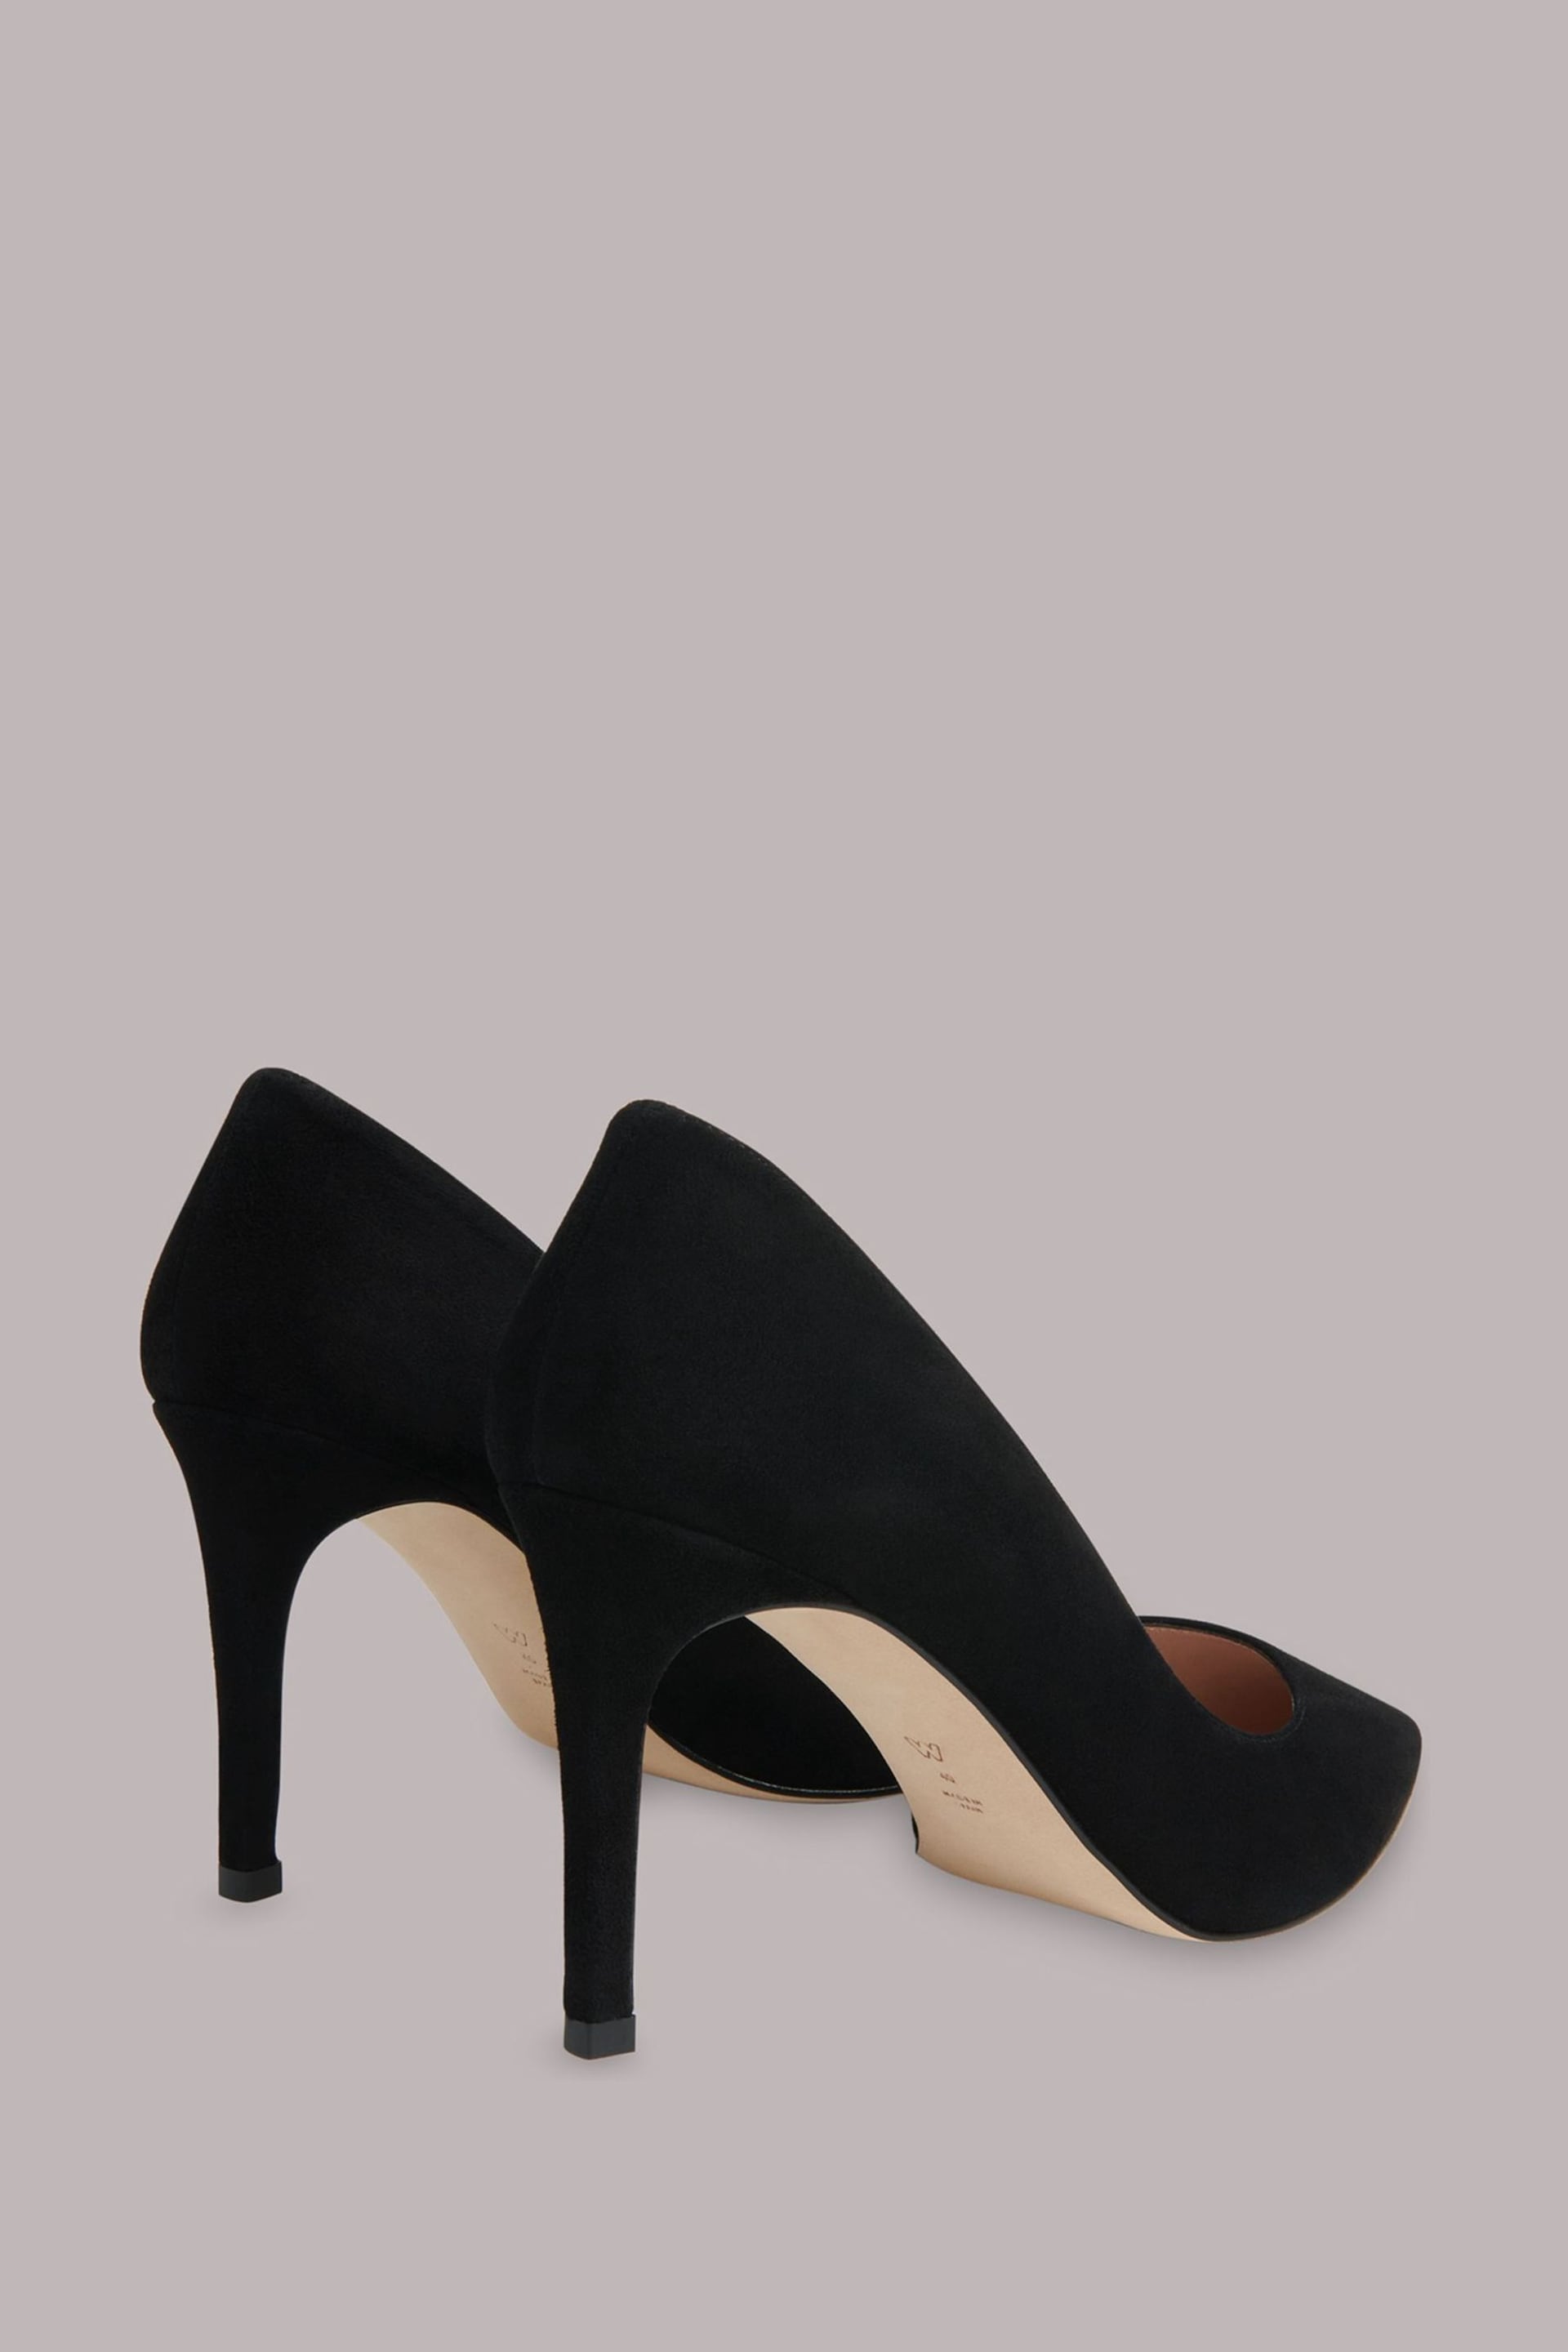 Whistles Corie Suede Black Heeled Pumps - Image 1 of 4